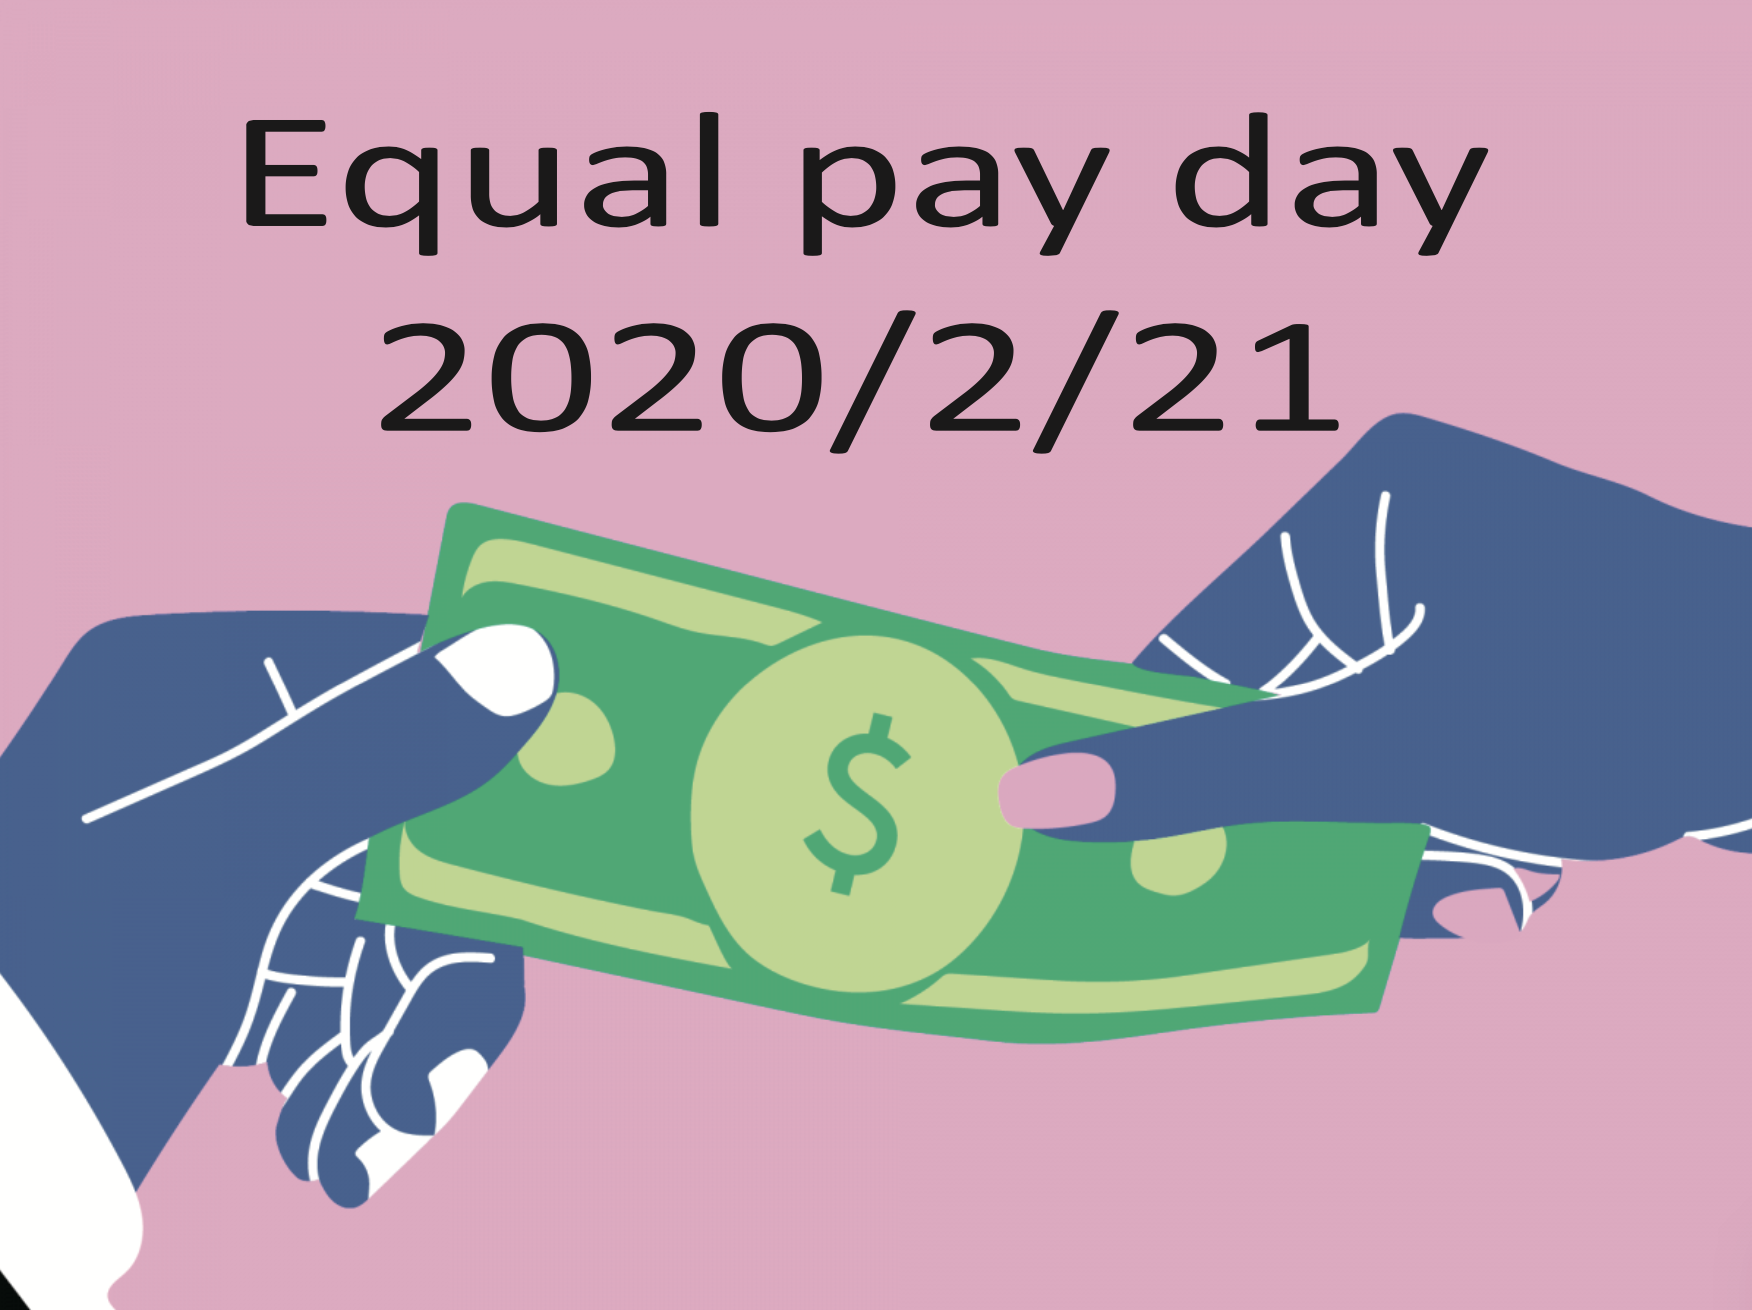 Equal Pay Day in Taiwan for 2020 is February 21